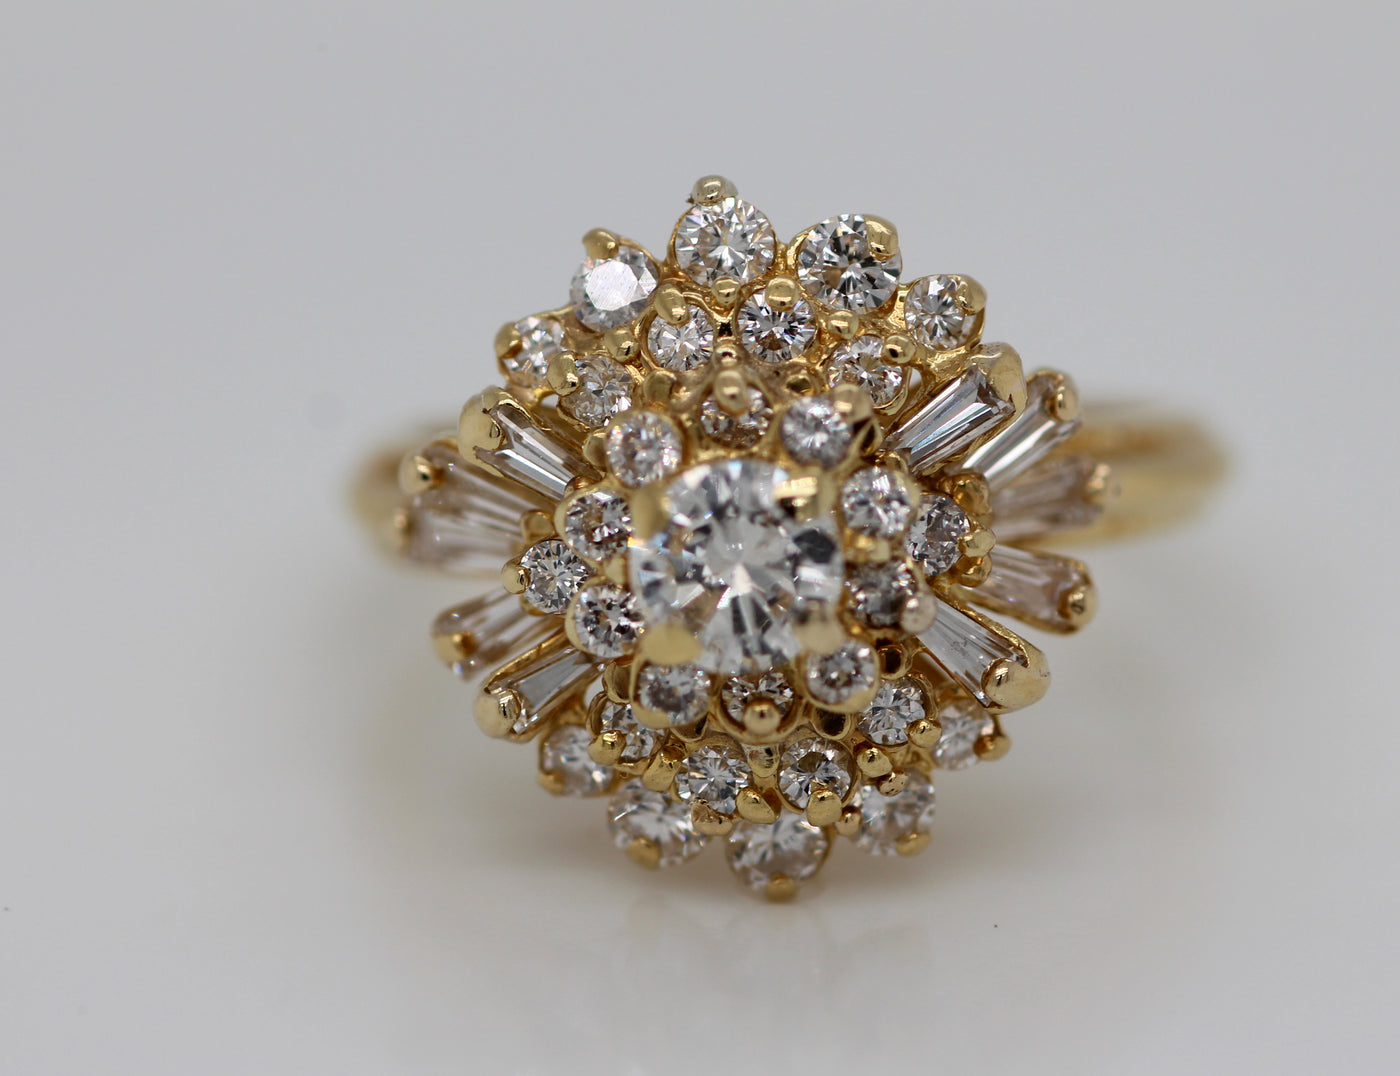 ESTATE 18KY 1.39 CTTW DIAMOND CLUSTER RING H-SI2